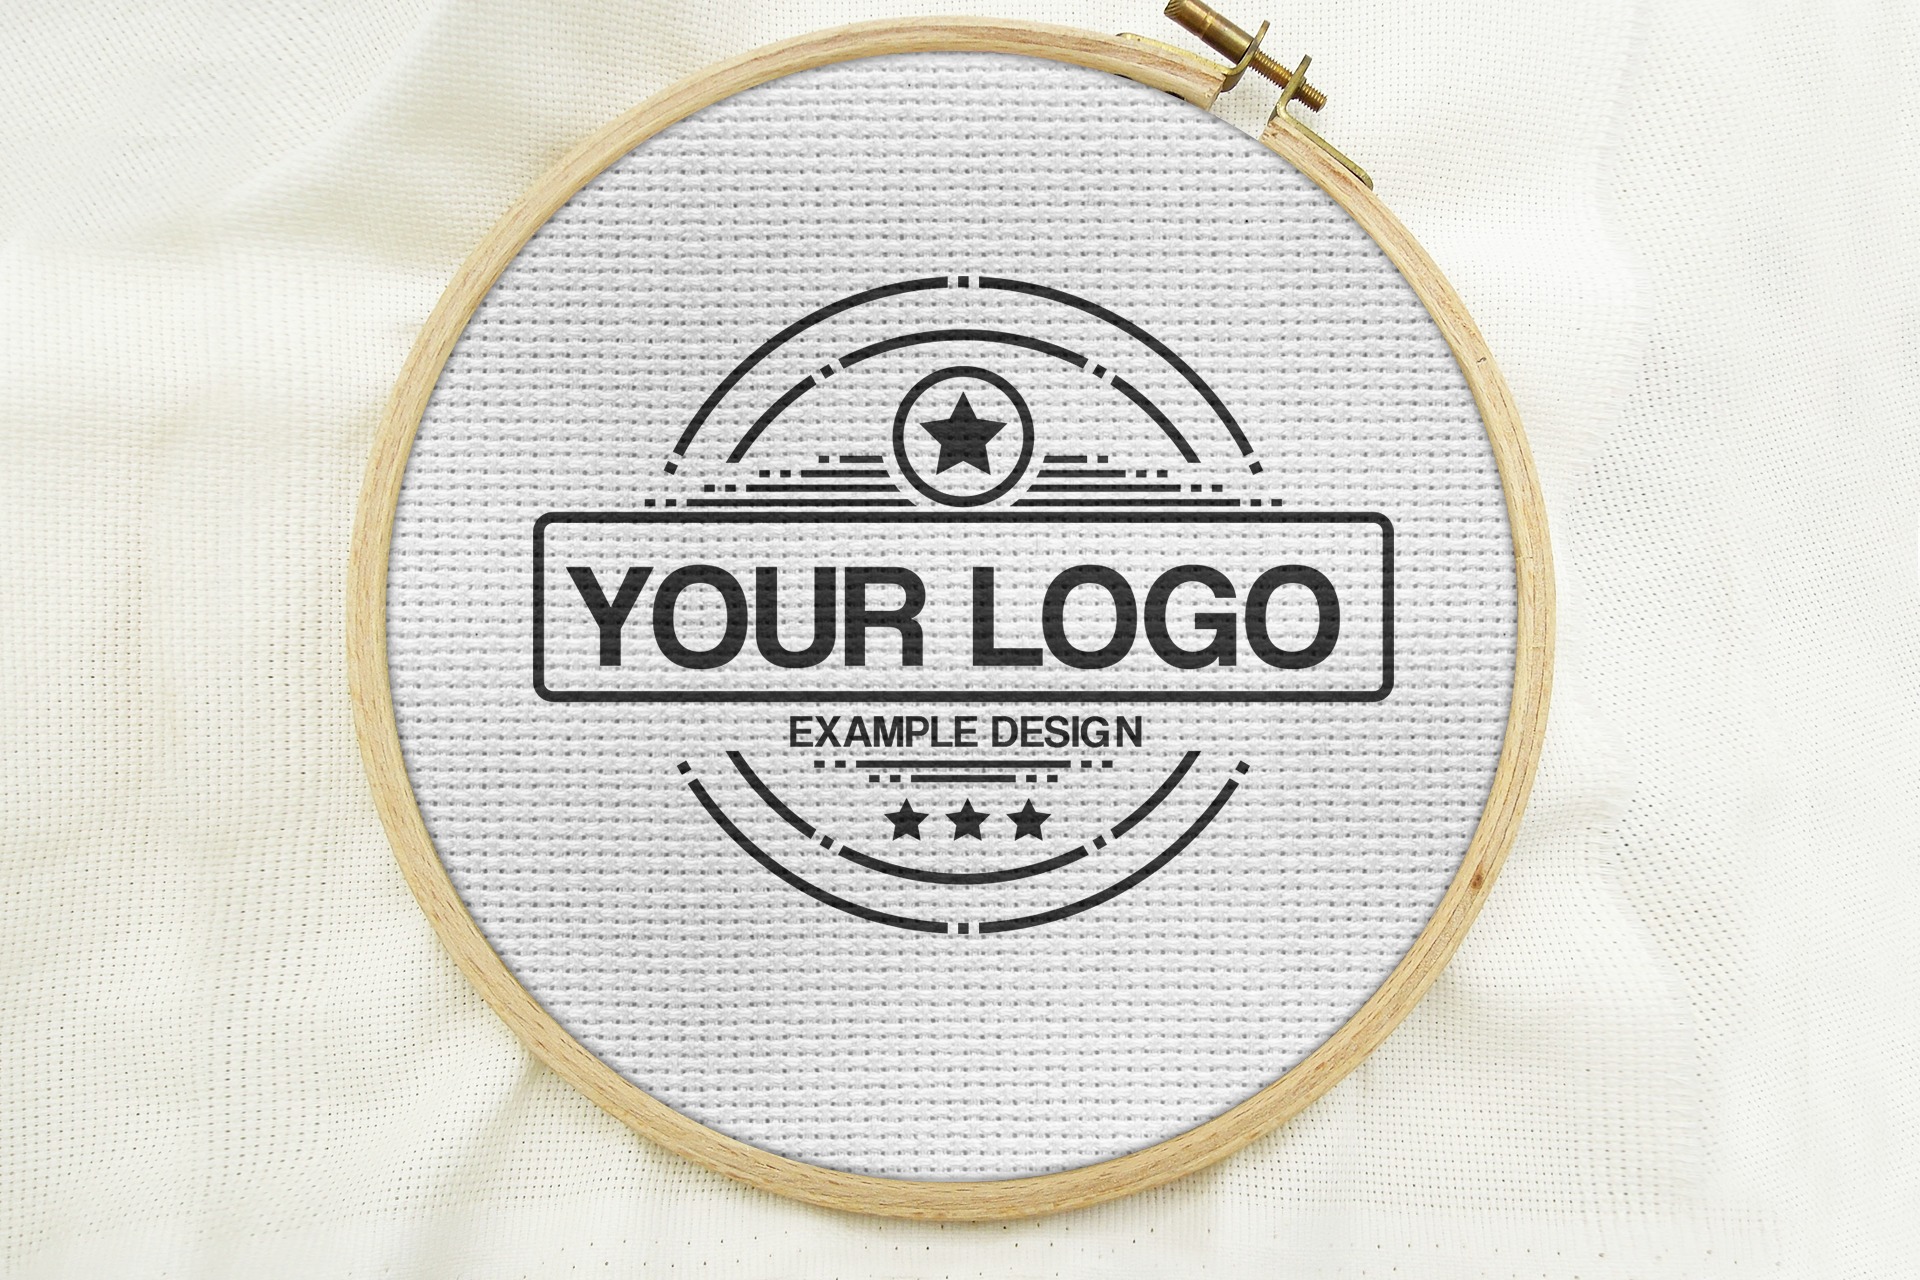 stitched logo embroidery effect online mockup template